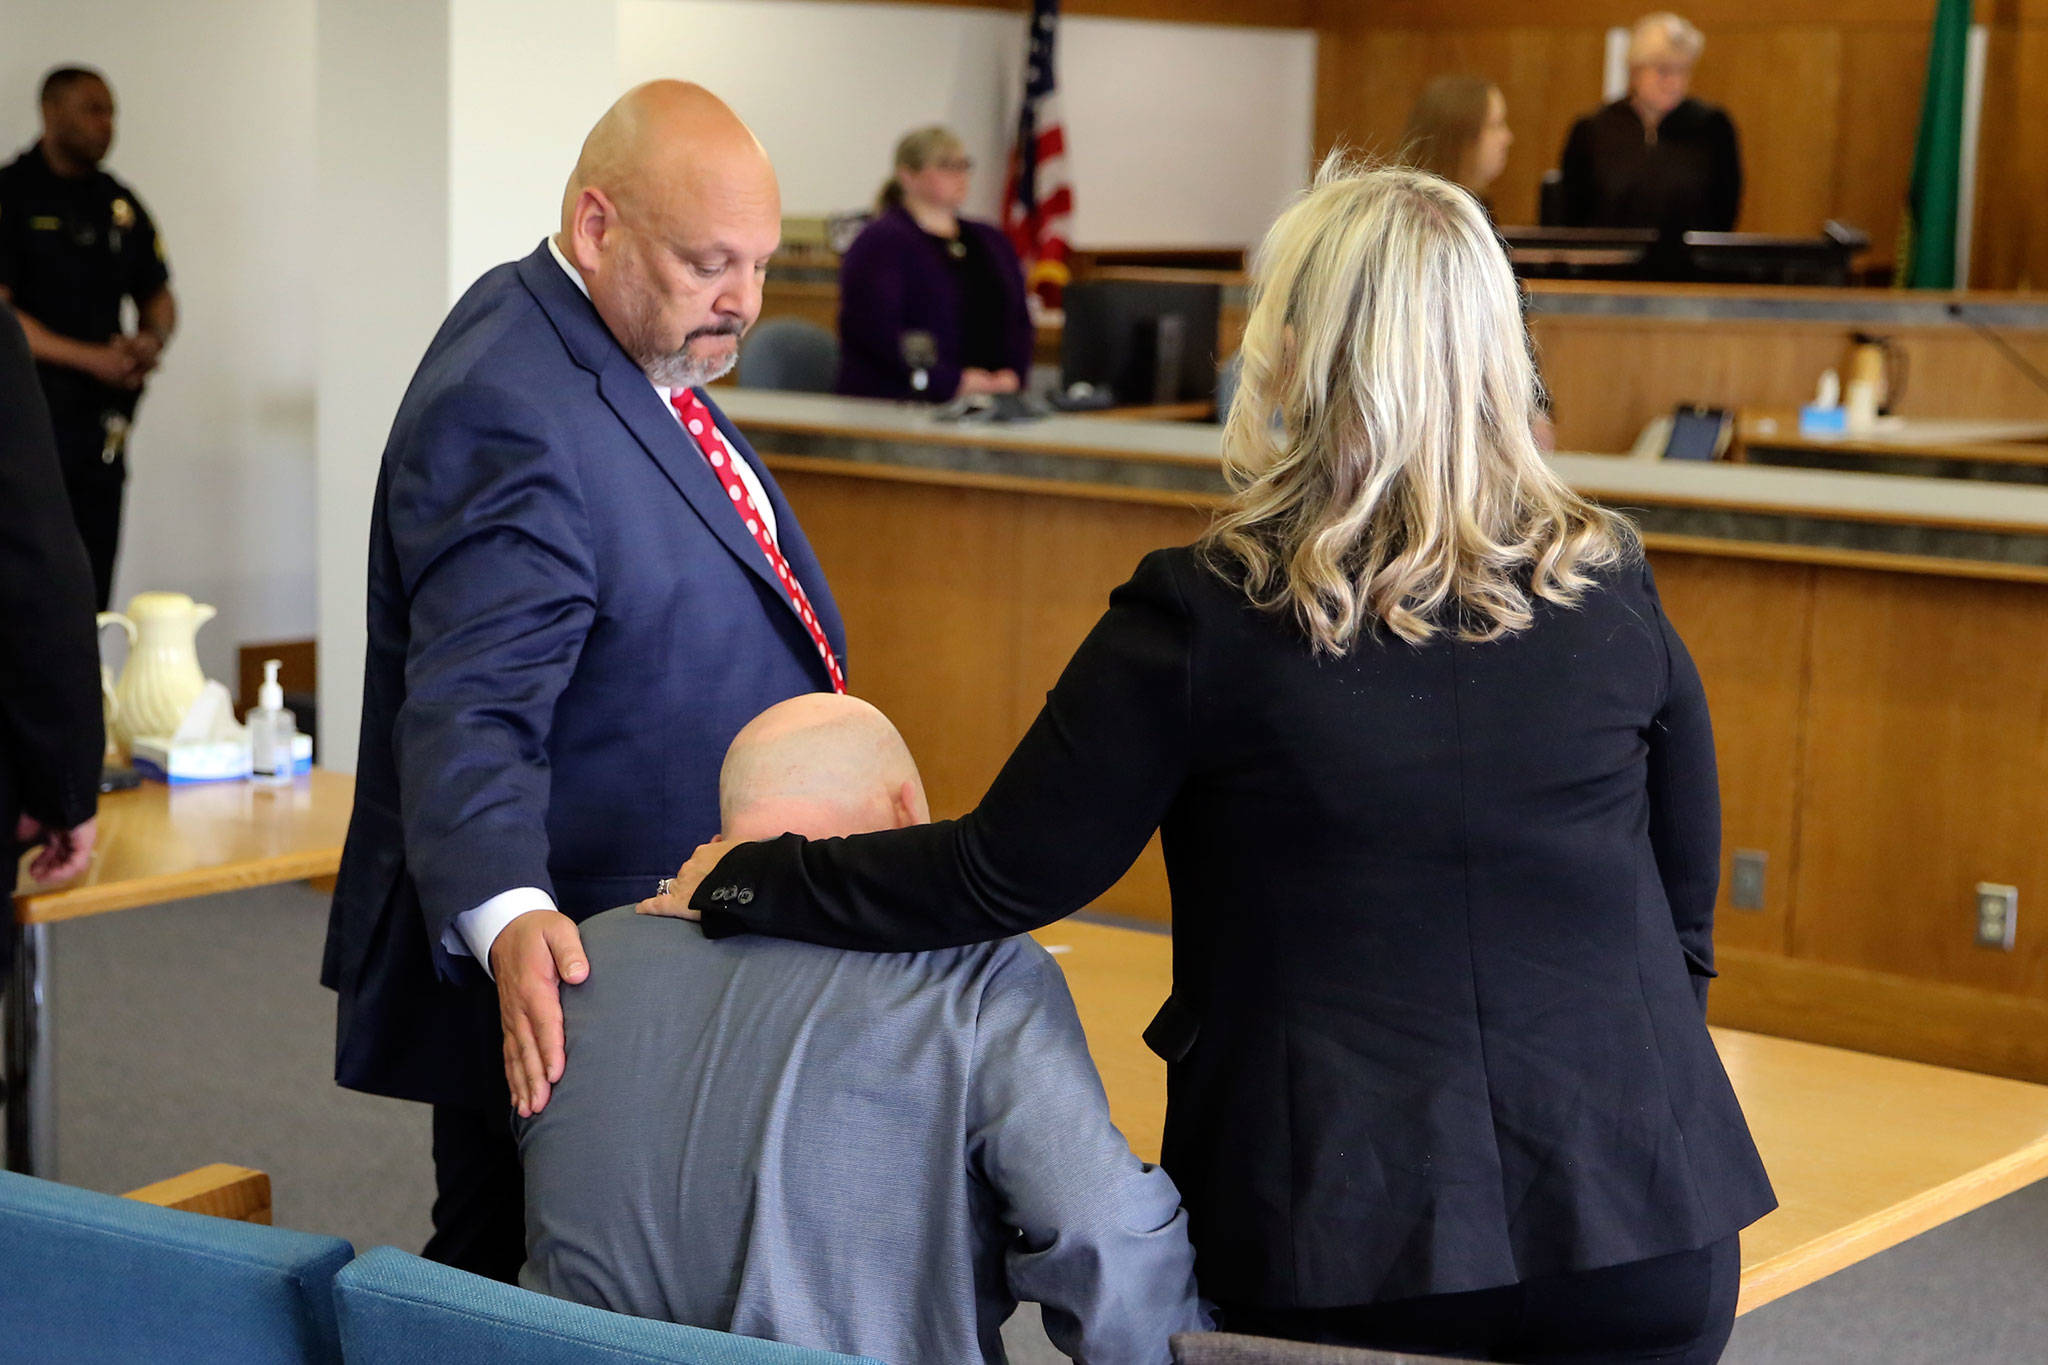 Defense attorneys Jon Scott (left) and Rachel Forde (right) stand as the jury is dismissed with William Talbott II seated Friday morning at the Snohomish County Court House in Everett on June 28, 2019. Talbott was found guilty of all charges. (Kevin Clark / The Herald)